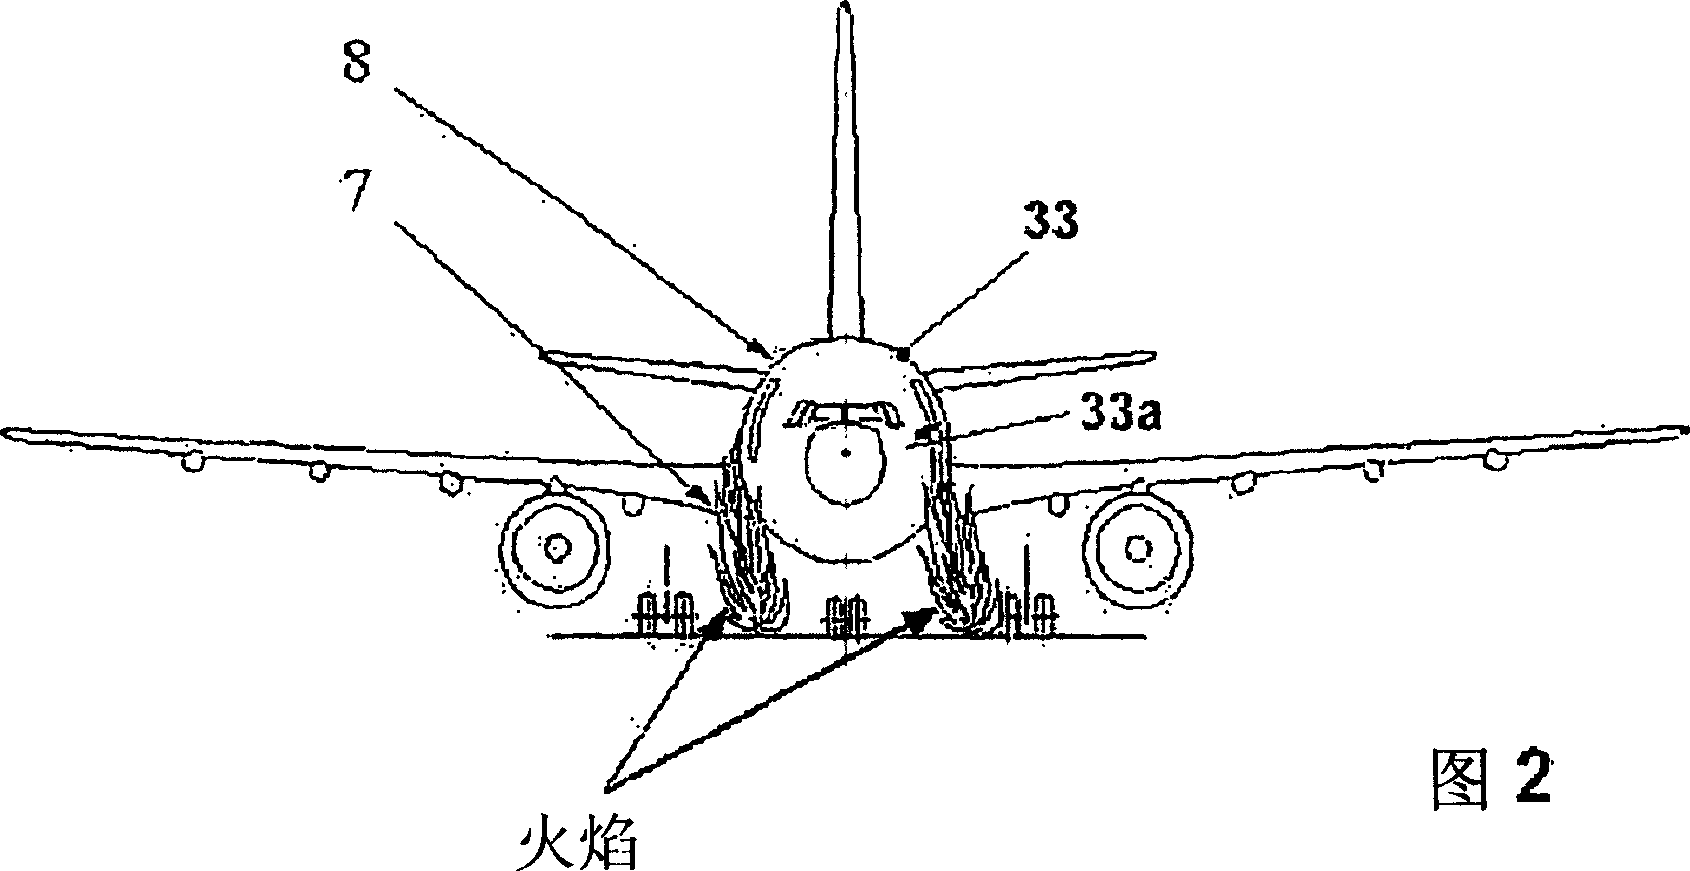 Insulation package arrangement for insulating the interior of an aircraft fuselage